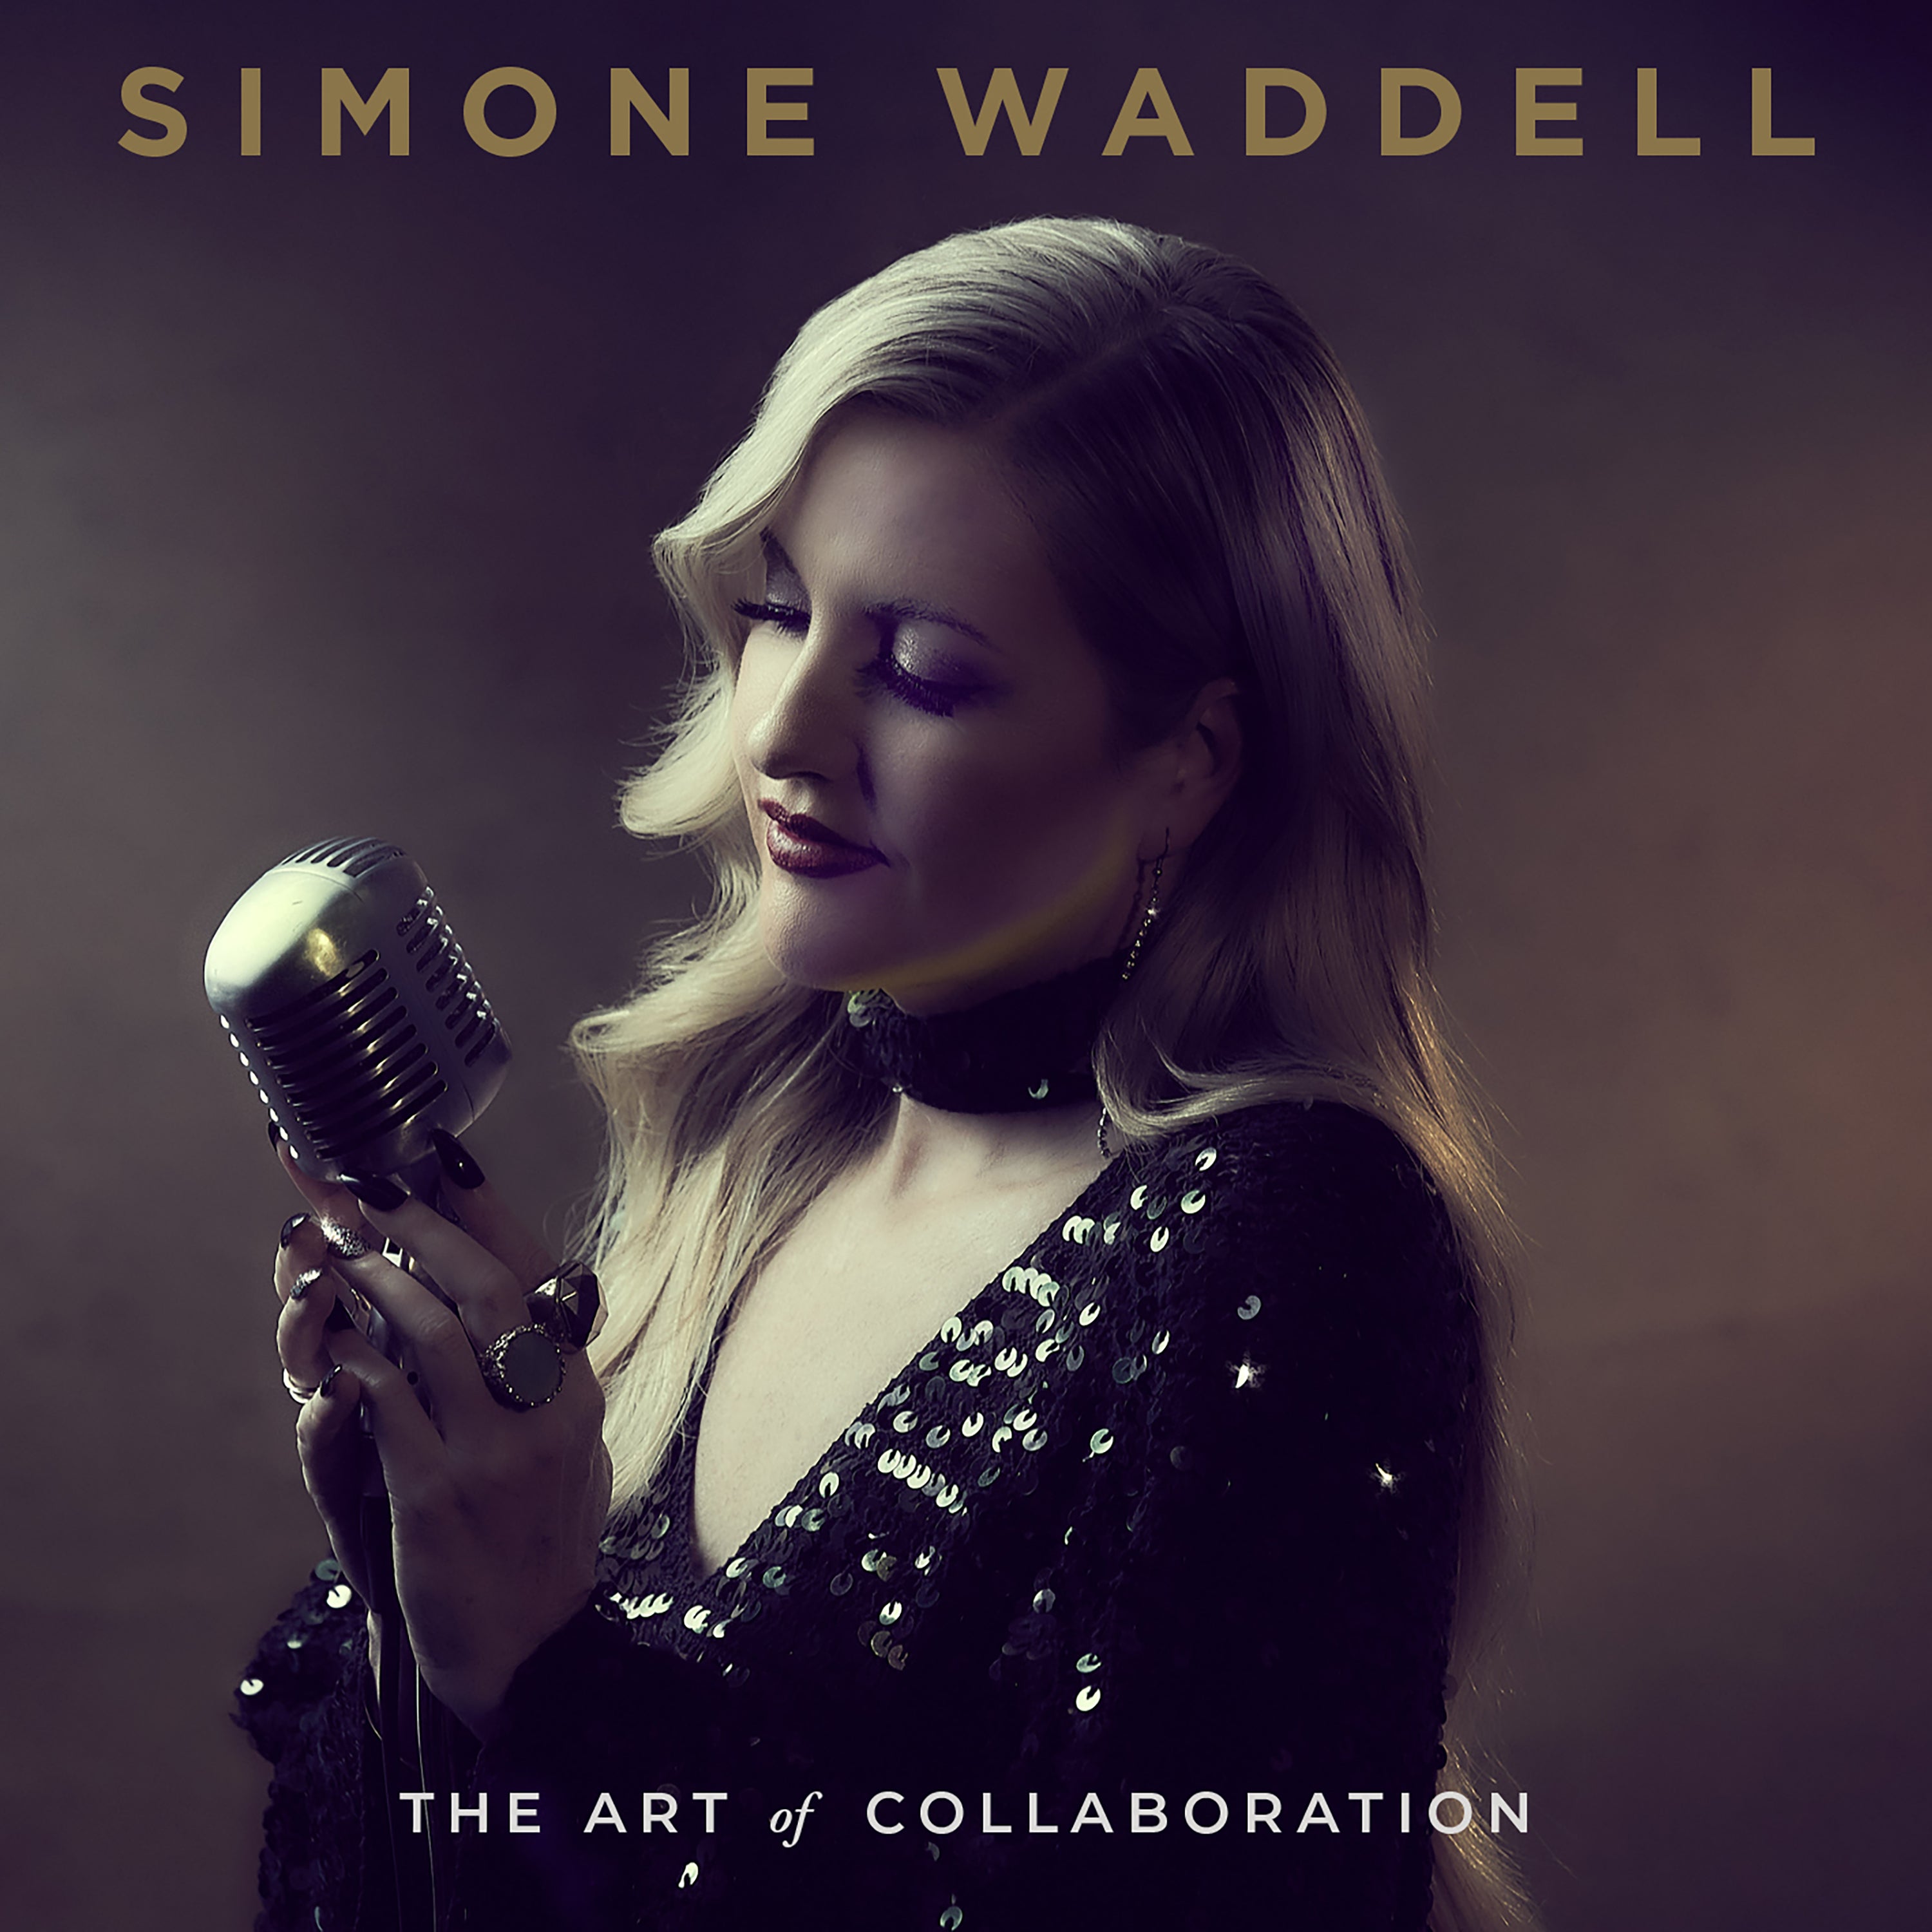 SIMONE WADDELL - THE ART OF COLLABORATION